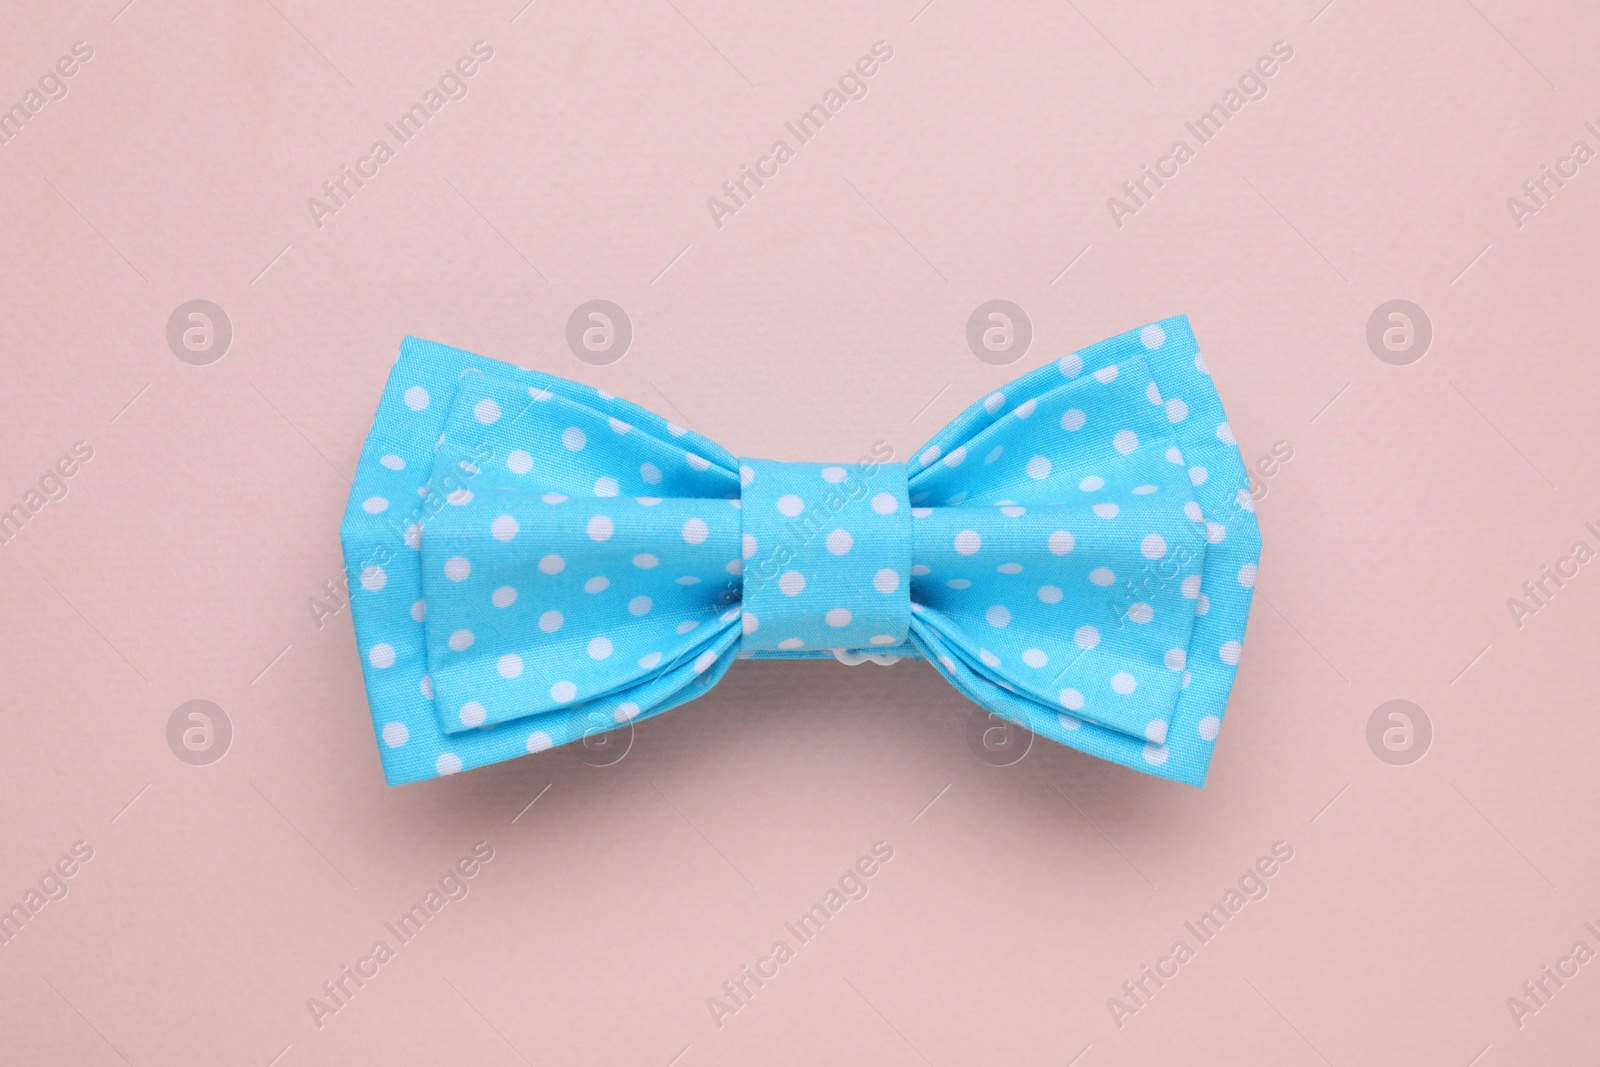 Photo of Stylish light blue bow tie with polka dot pattern on beige background, top view